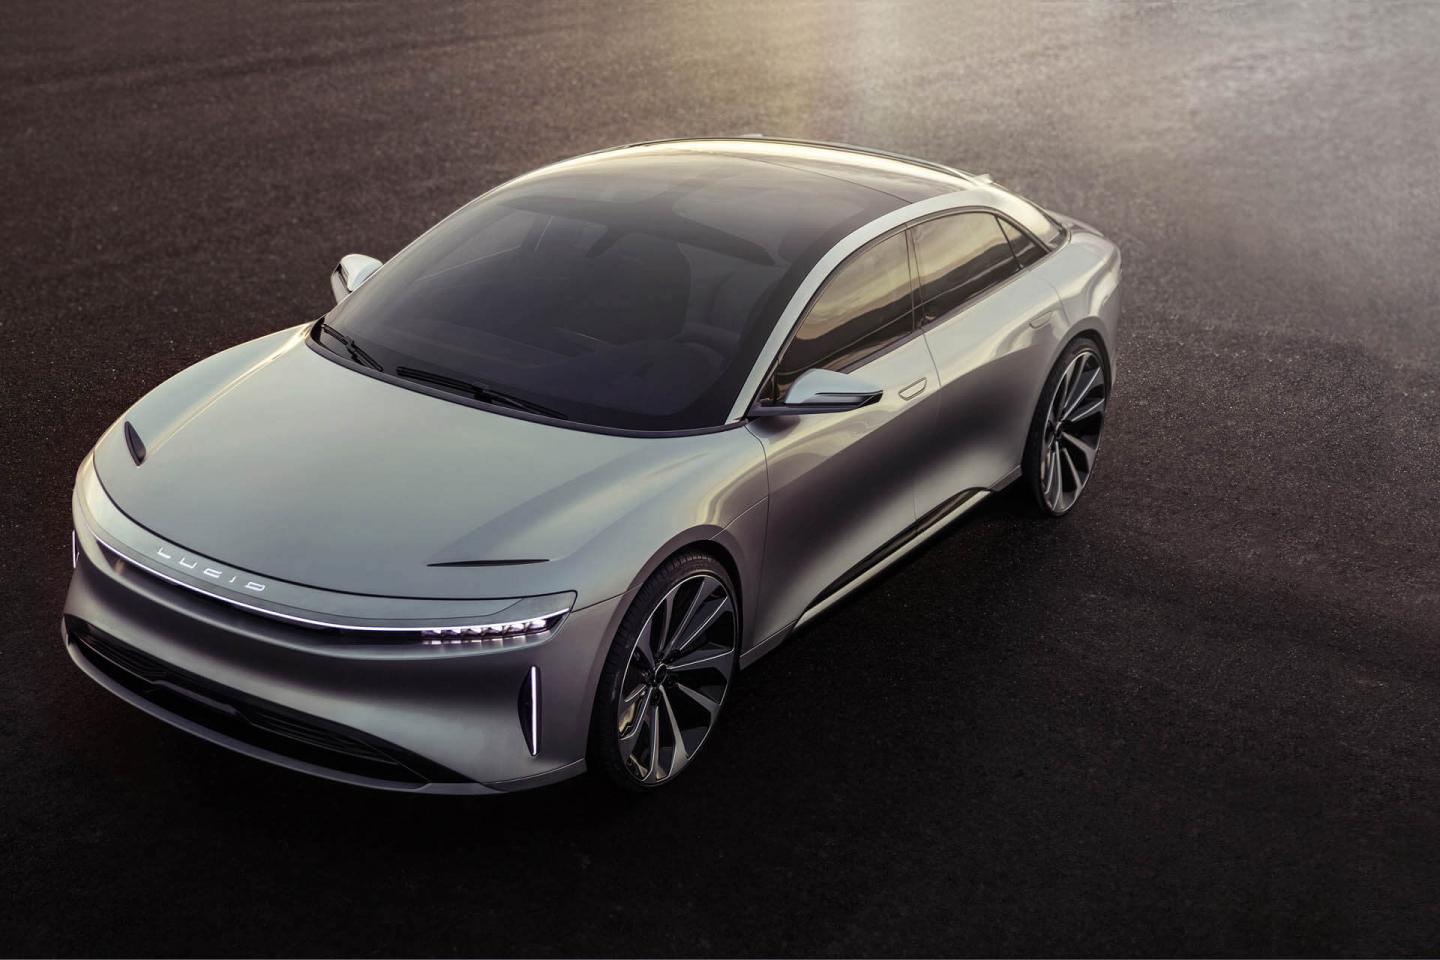 Saudi fund interested in Tesla also looking at Lucid Motors – report